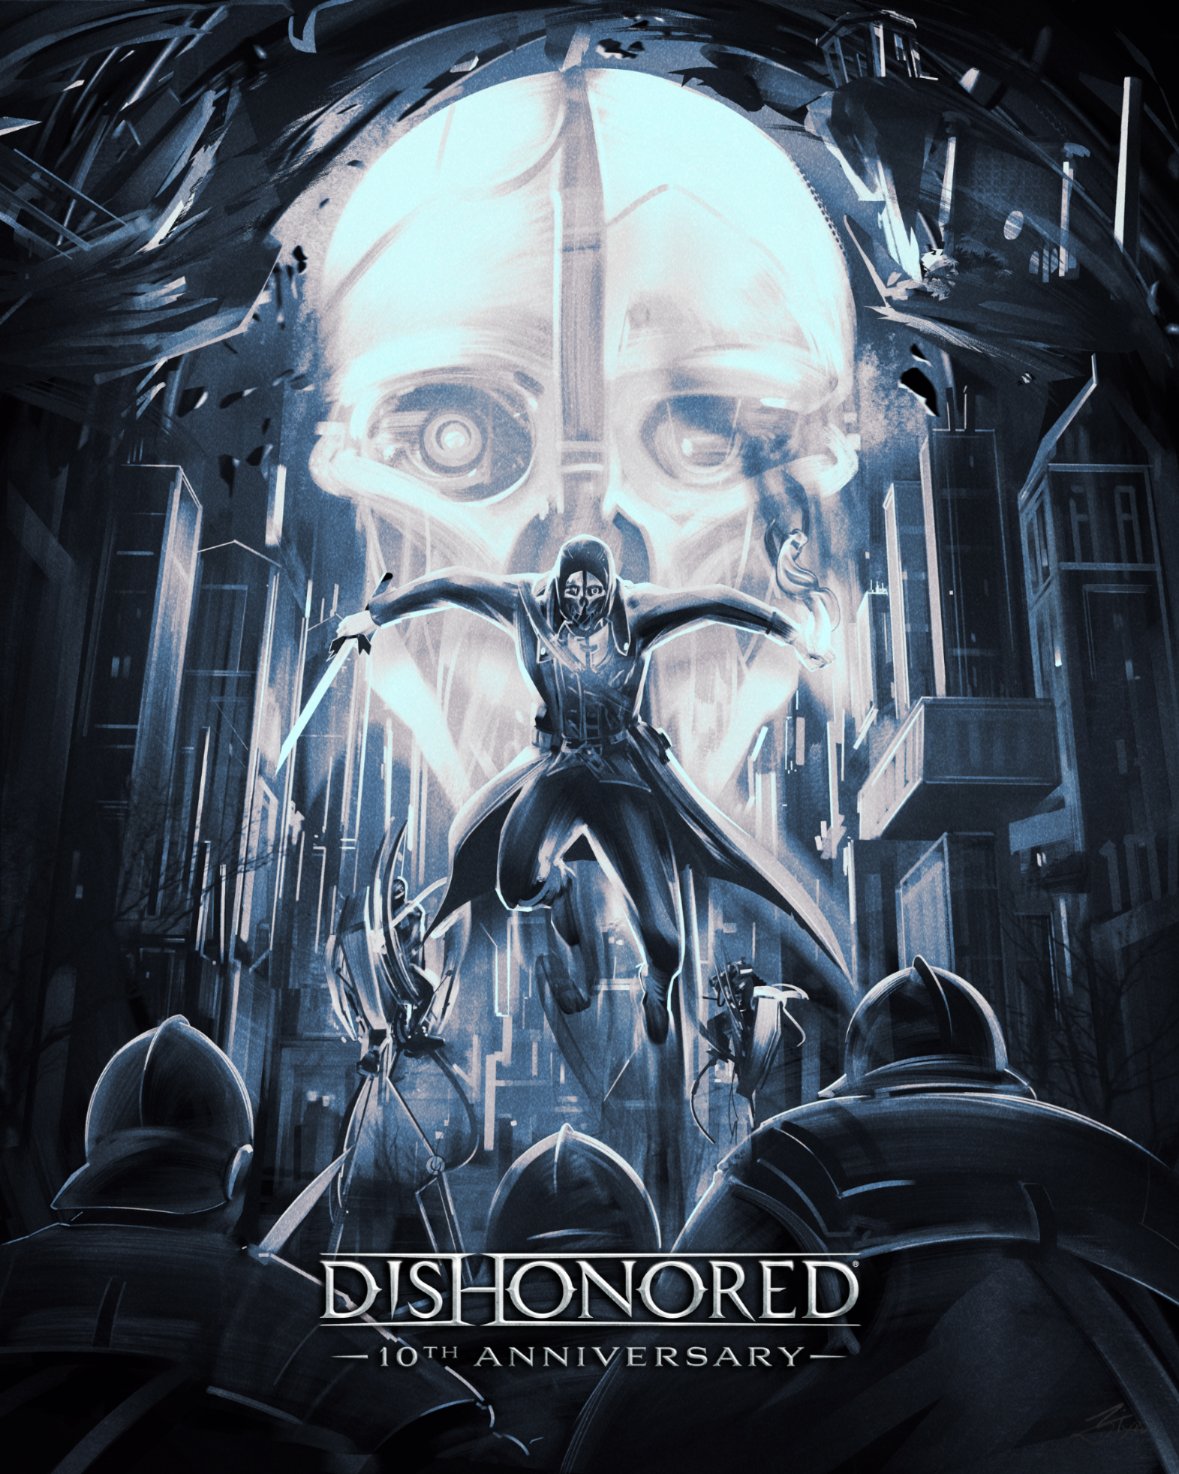 Artwork by Bethesda Game Studios – Dishonored